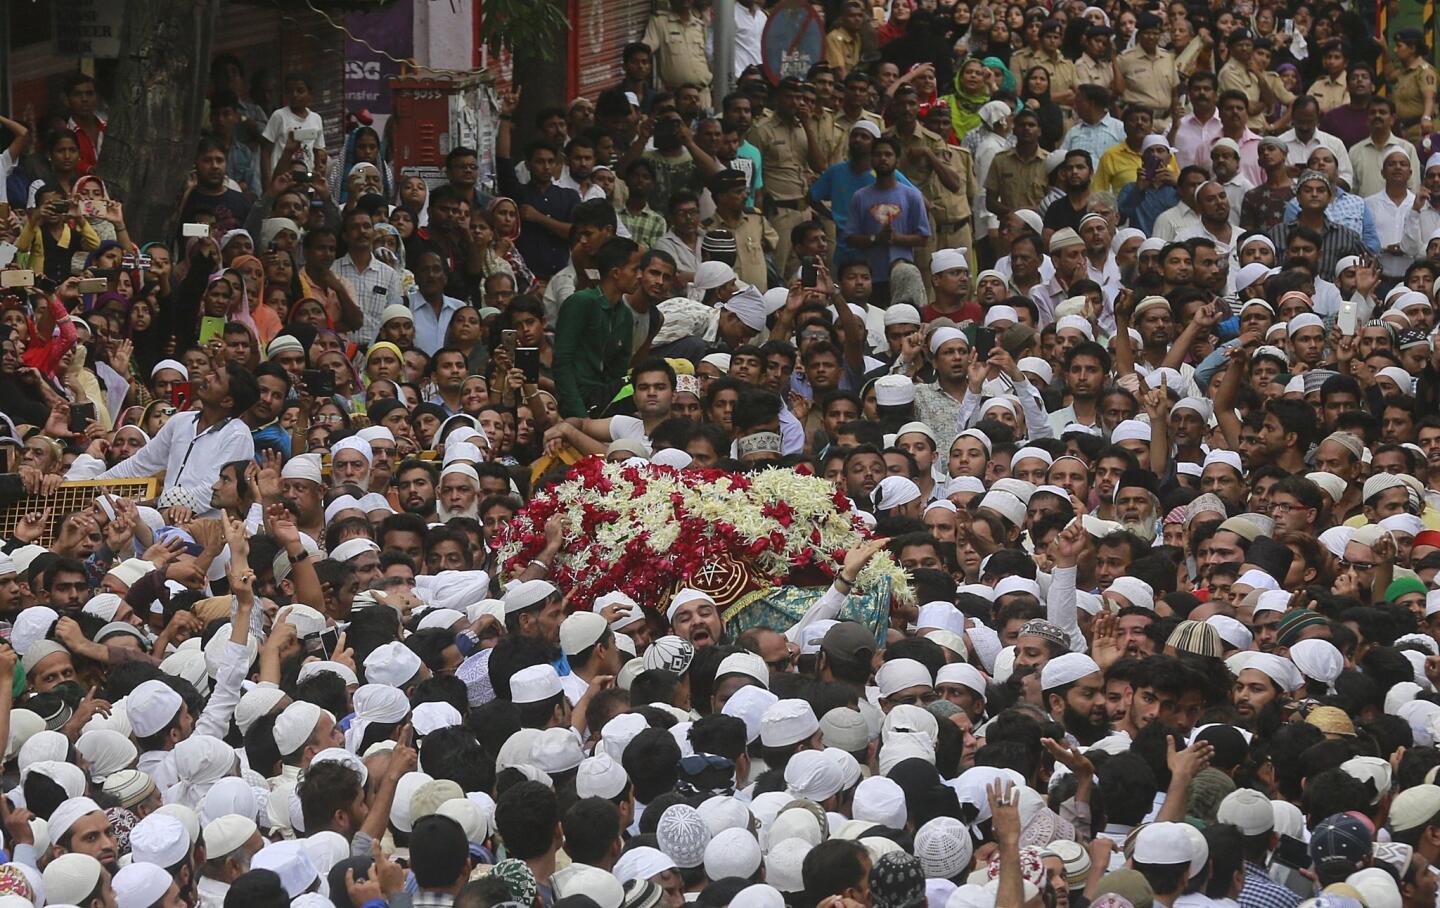 People carry the body of Yakub Memon outside his family residence during his funeral in Mumbai, India, on July 30. Memon was executed for his role in the 1993 Mumbai bombings in which 13 bombs ripped through hotels, bazaars and the stock exchange in India’s financial capital.